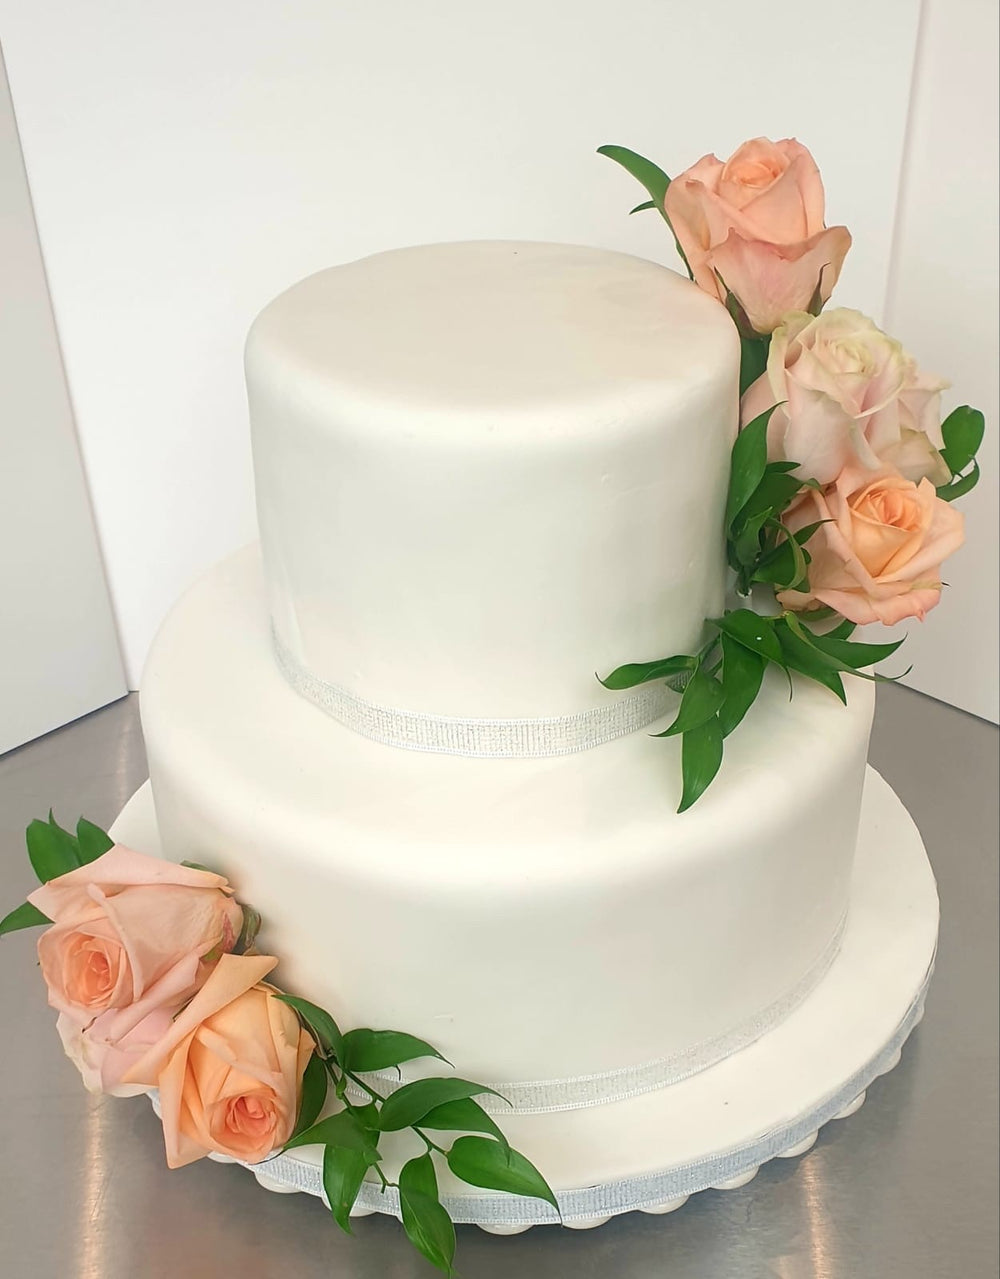 10 simple wedding cakes that caught our attention – Easy Weddings